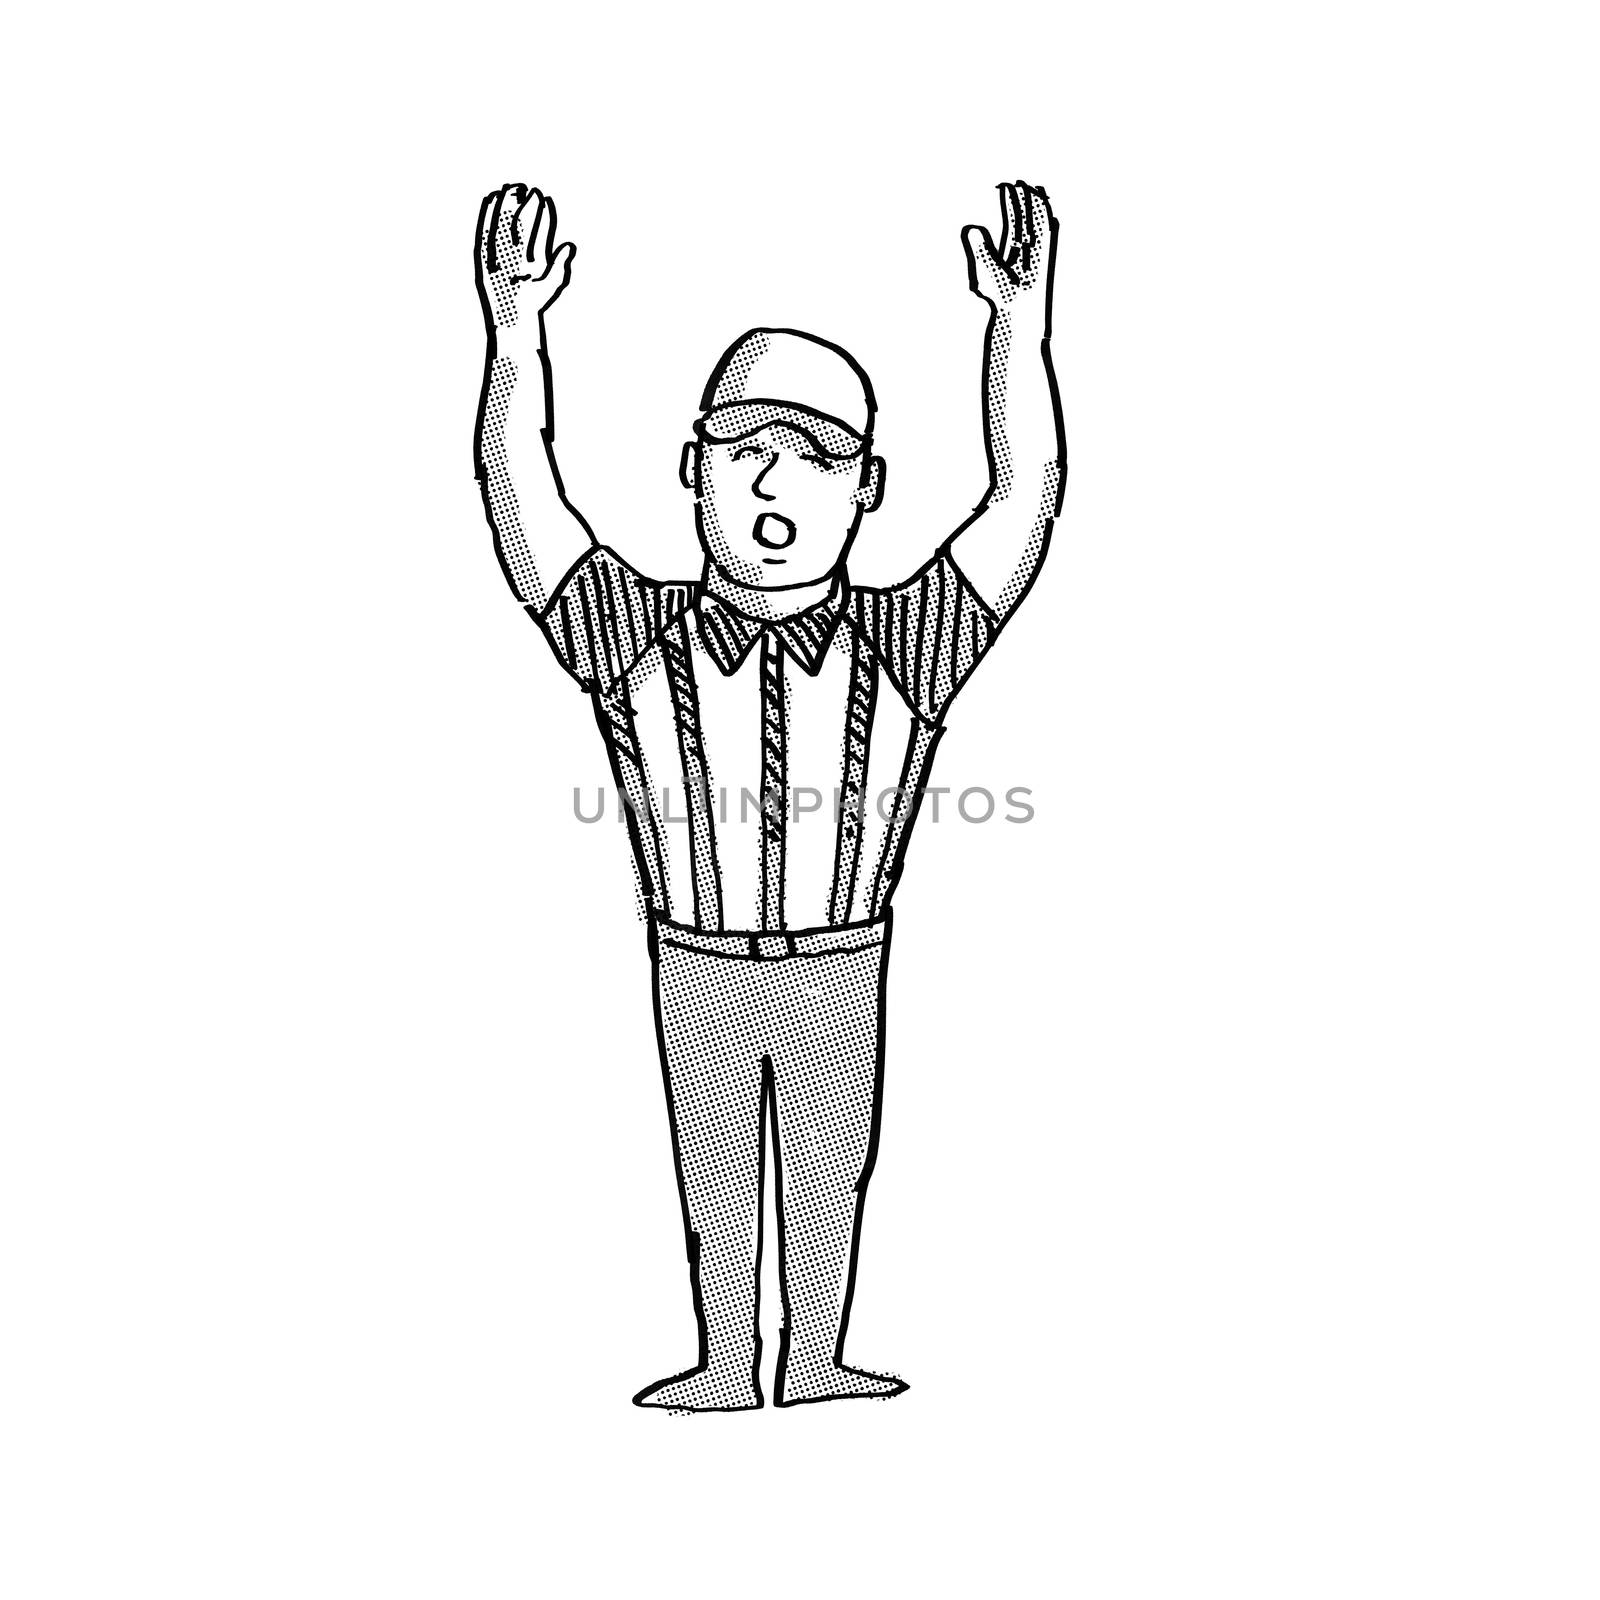 American Football Official  Cartoon Black and White by patrimonio